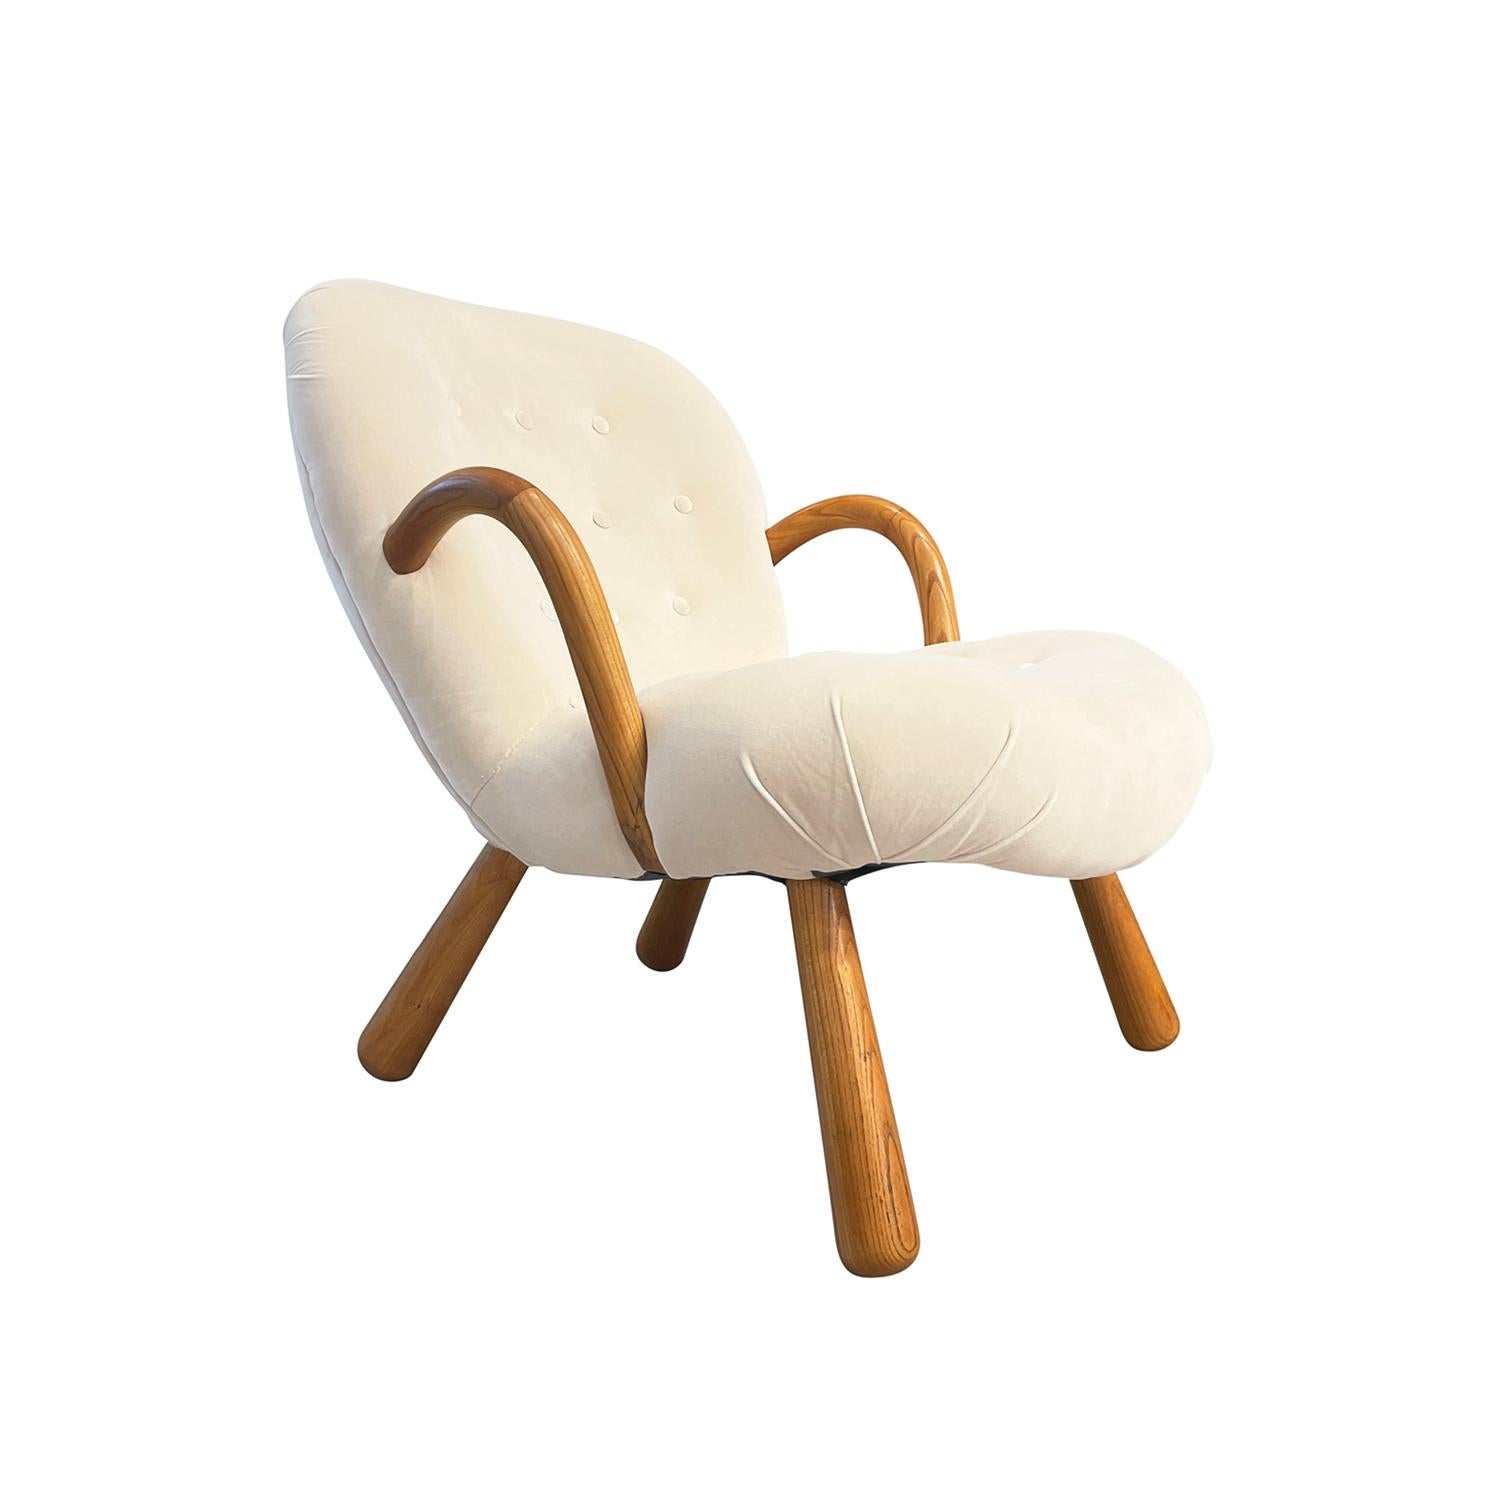 Hand-Carved 20th Century Danish Vintage Beech Clam Chair by Arnold Madsen & Schubell For Sale